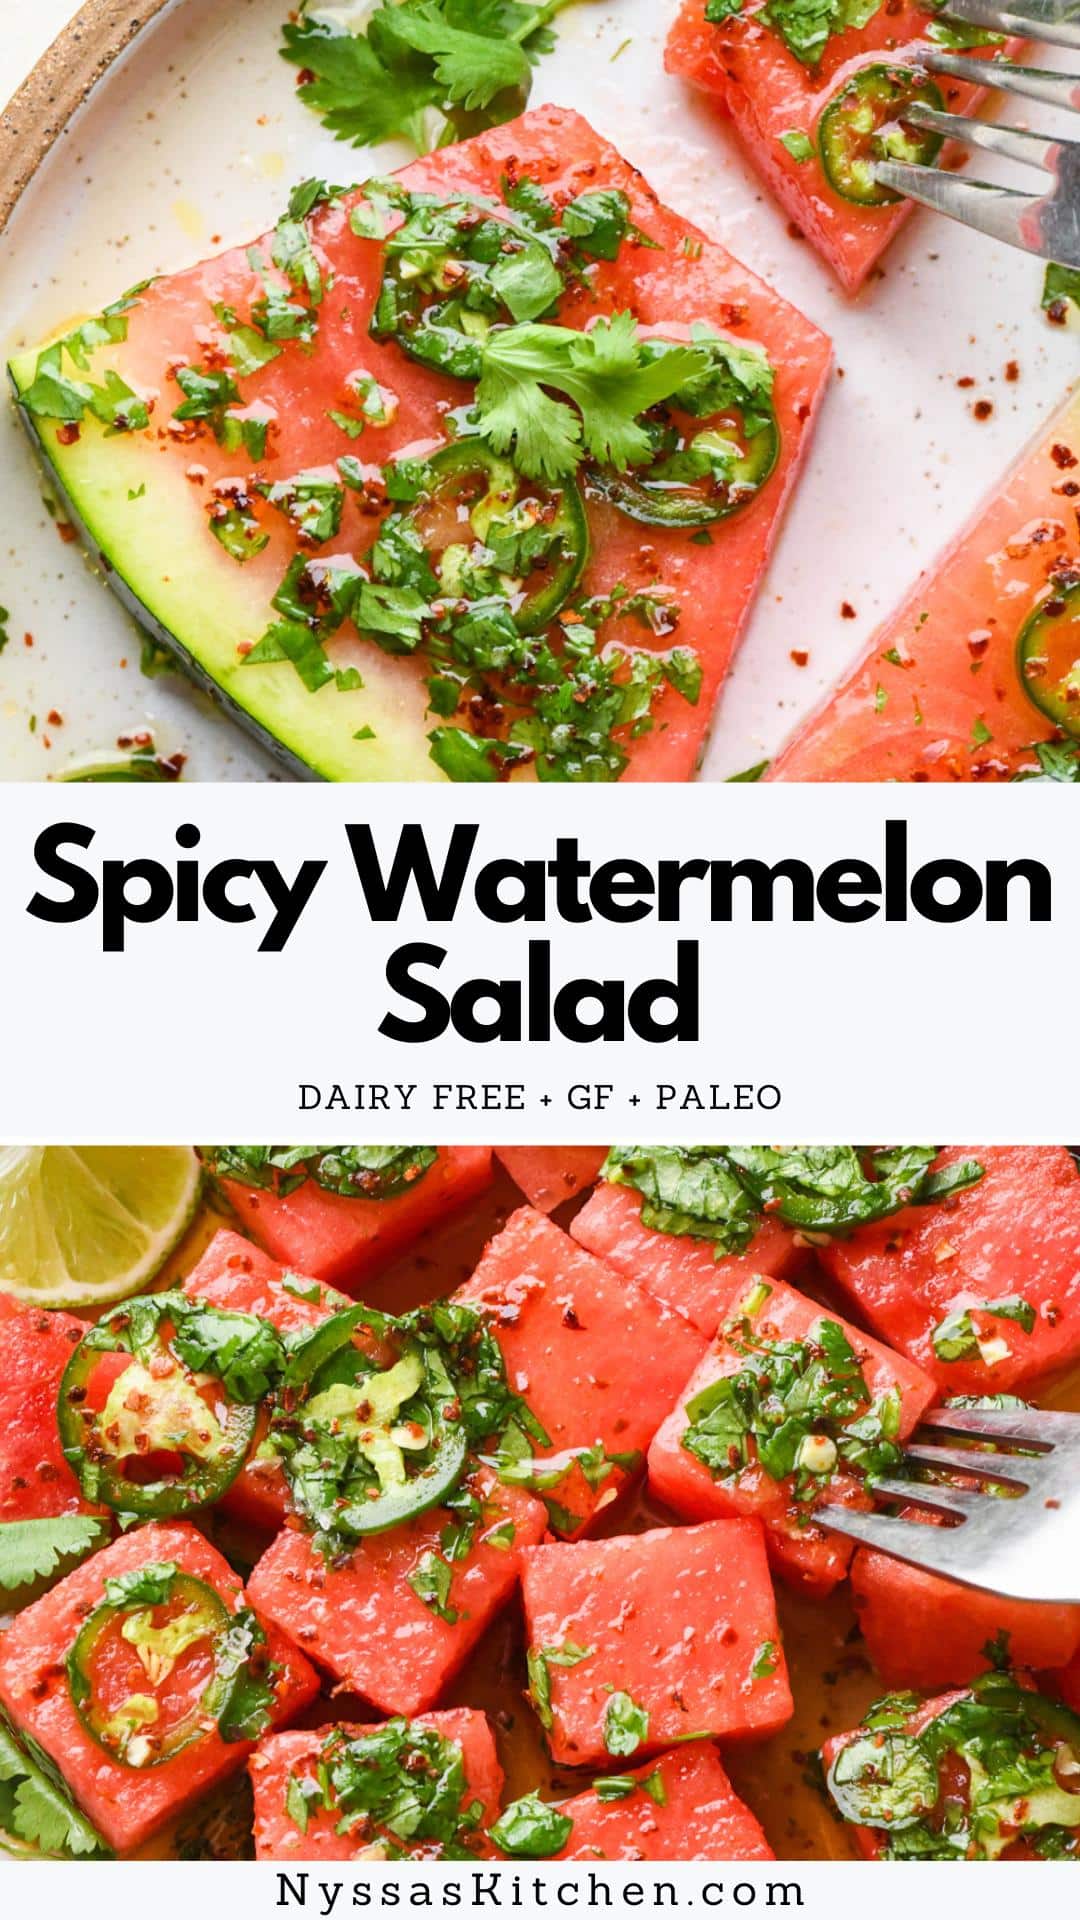 This spicy watermelon salad with cilantro and lime is a real crowd-pleasing delight during the warm summer months! It's spicy, sweet, and draped in a bright and citrusy dressing for the ultimate watermelon salad experience. Refreshing and FULL of summer flavor! GF, dairy free, vegetarian, paleo, vegan option, Whole30 option.